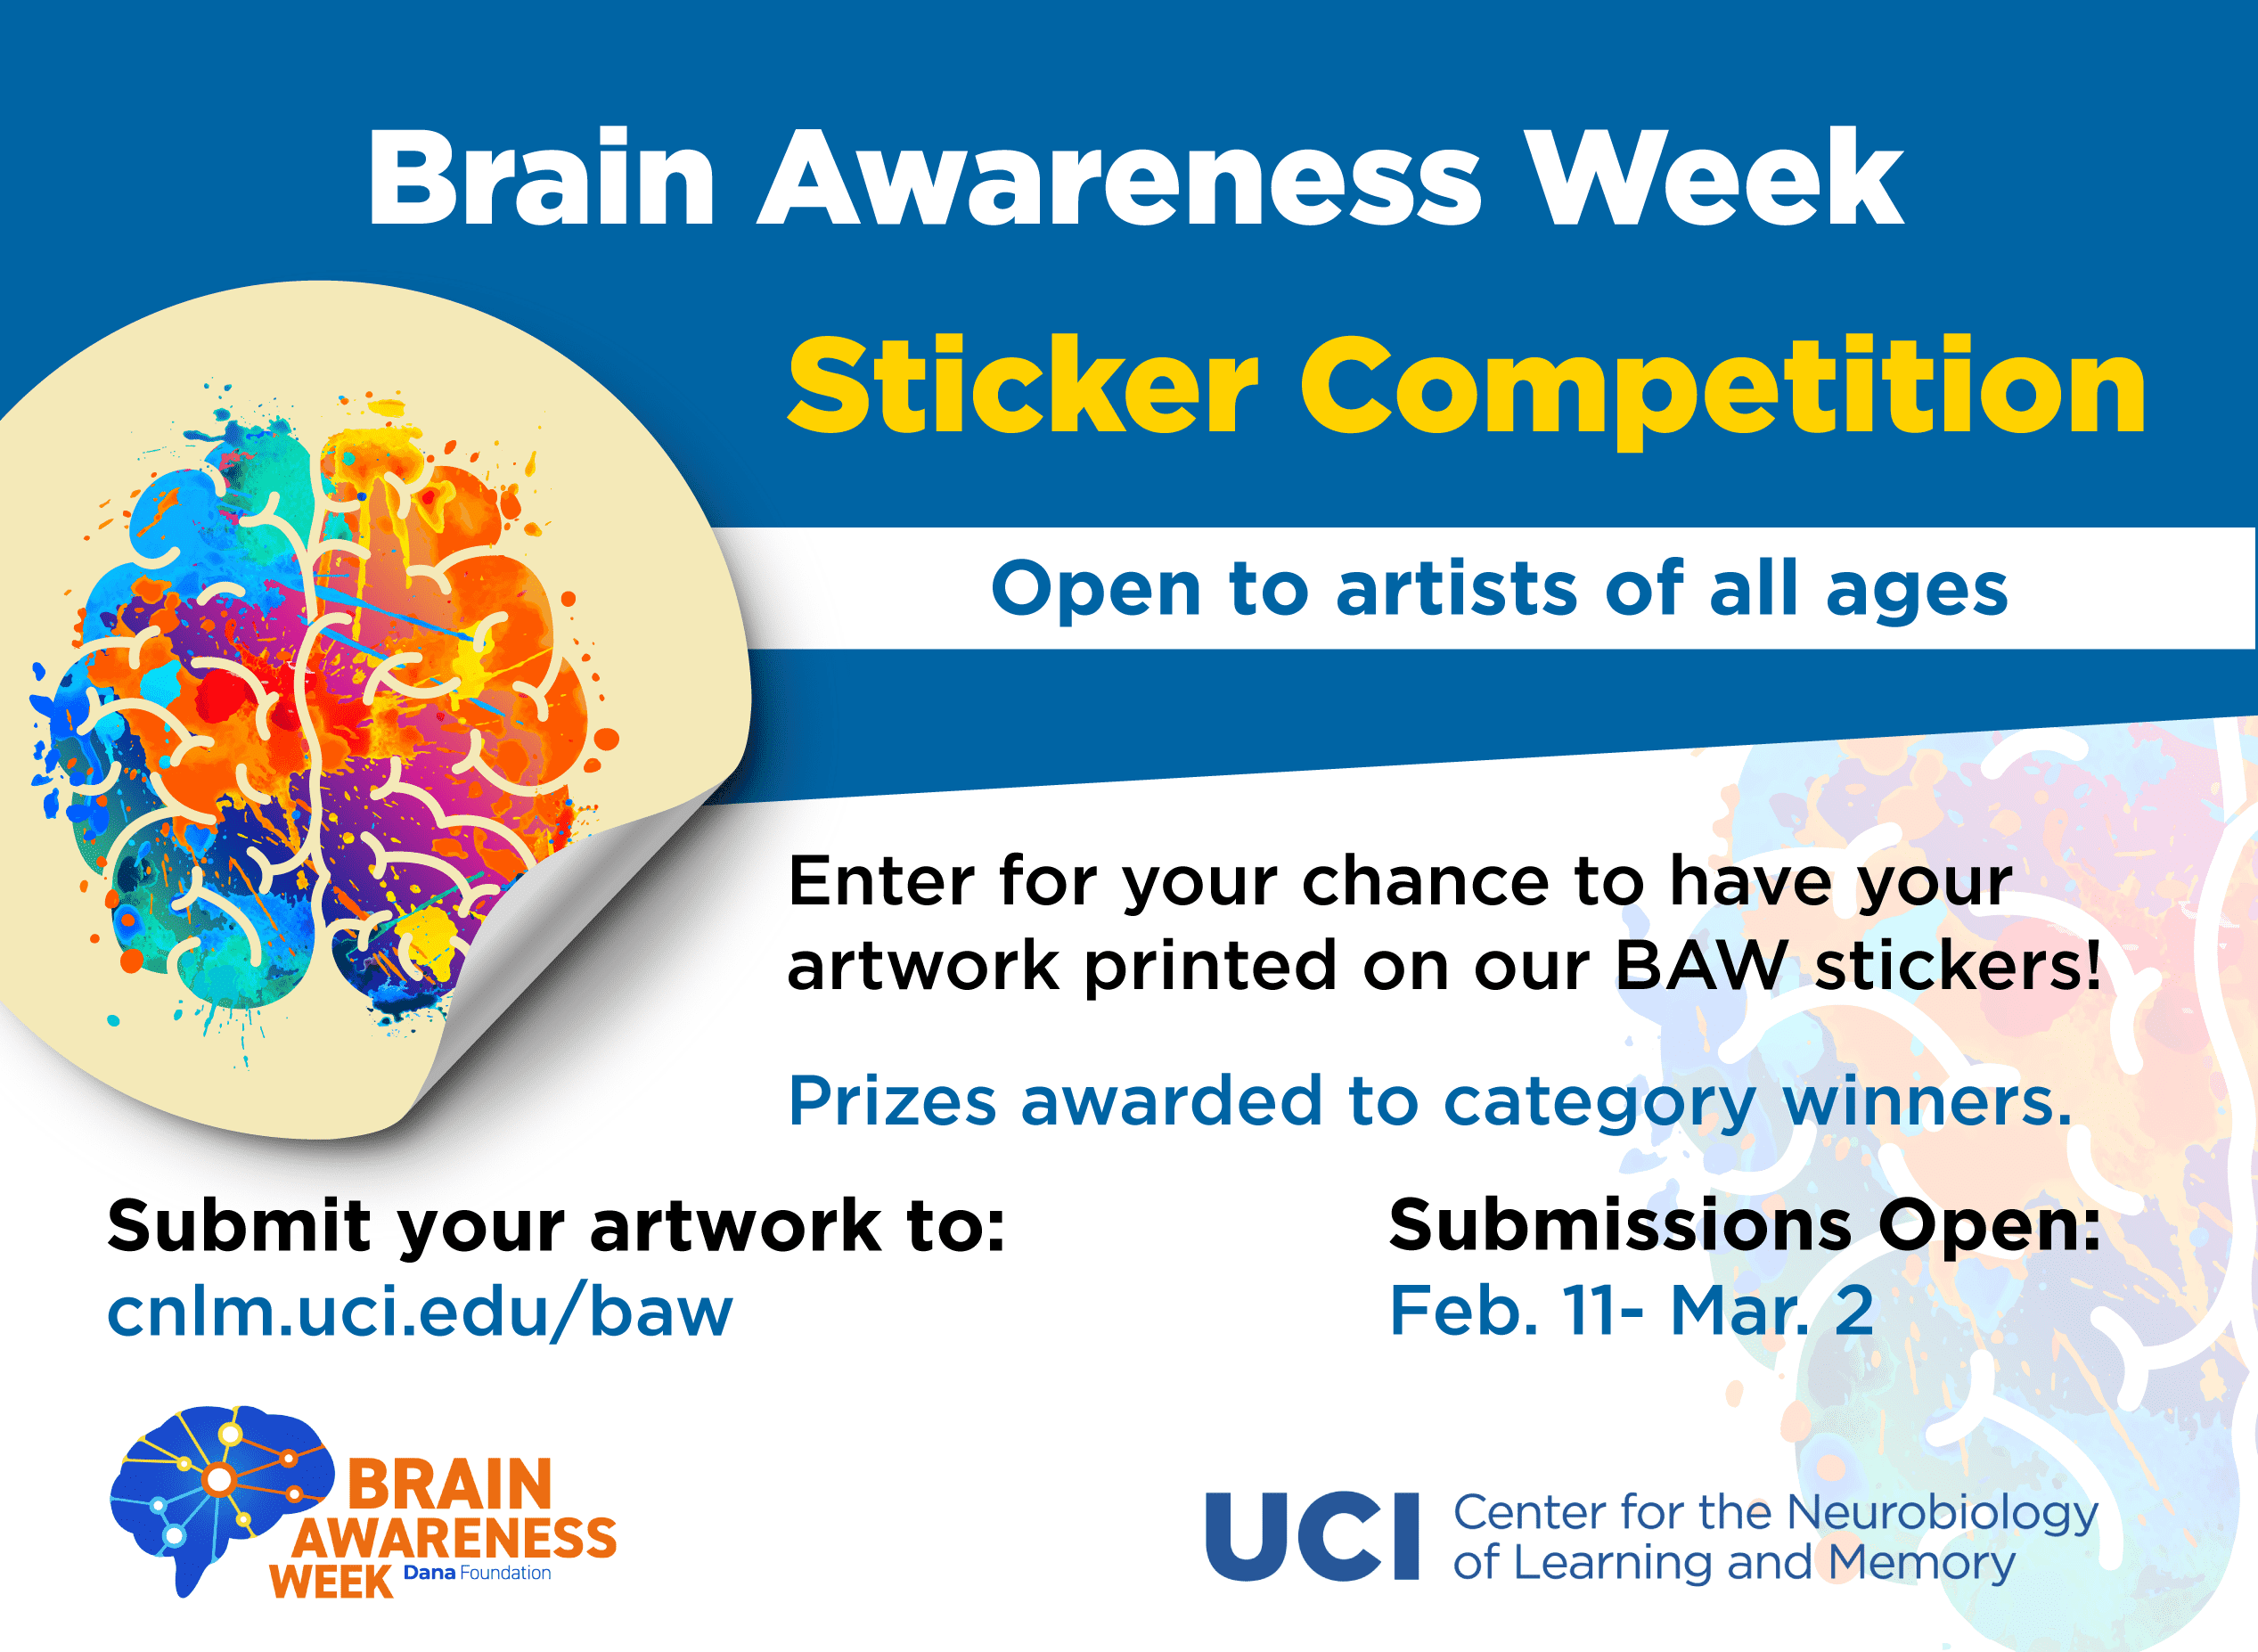 Brain Awareness Week Sticker Competition Open - Image of sticker with human brain